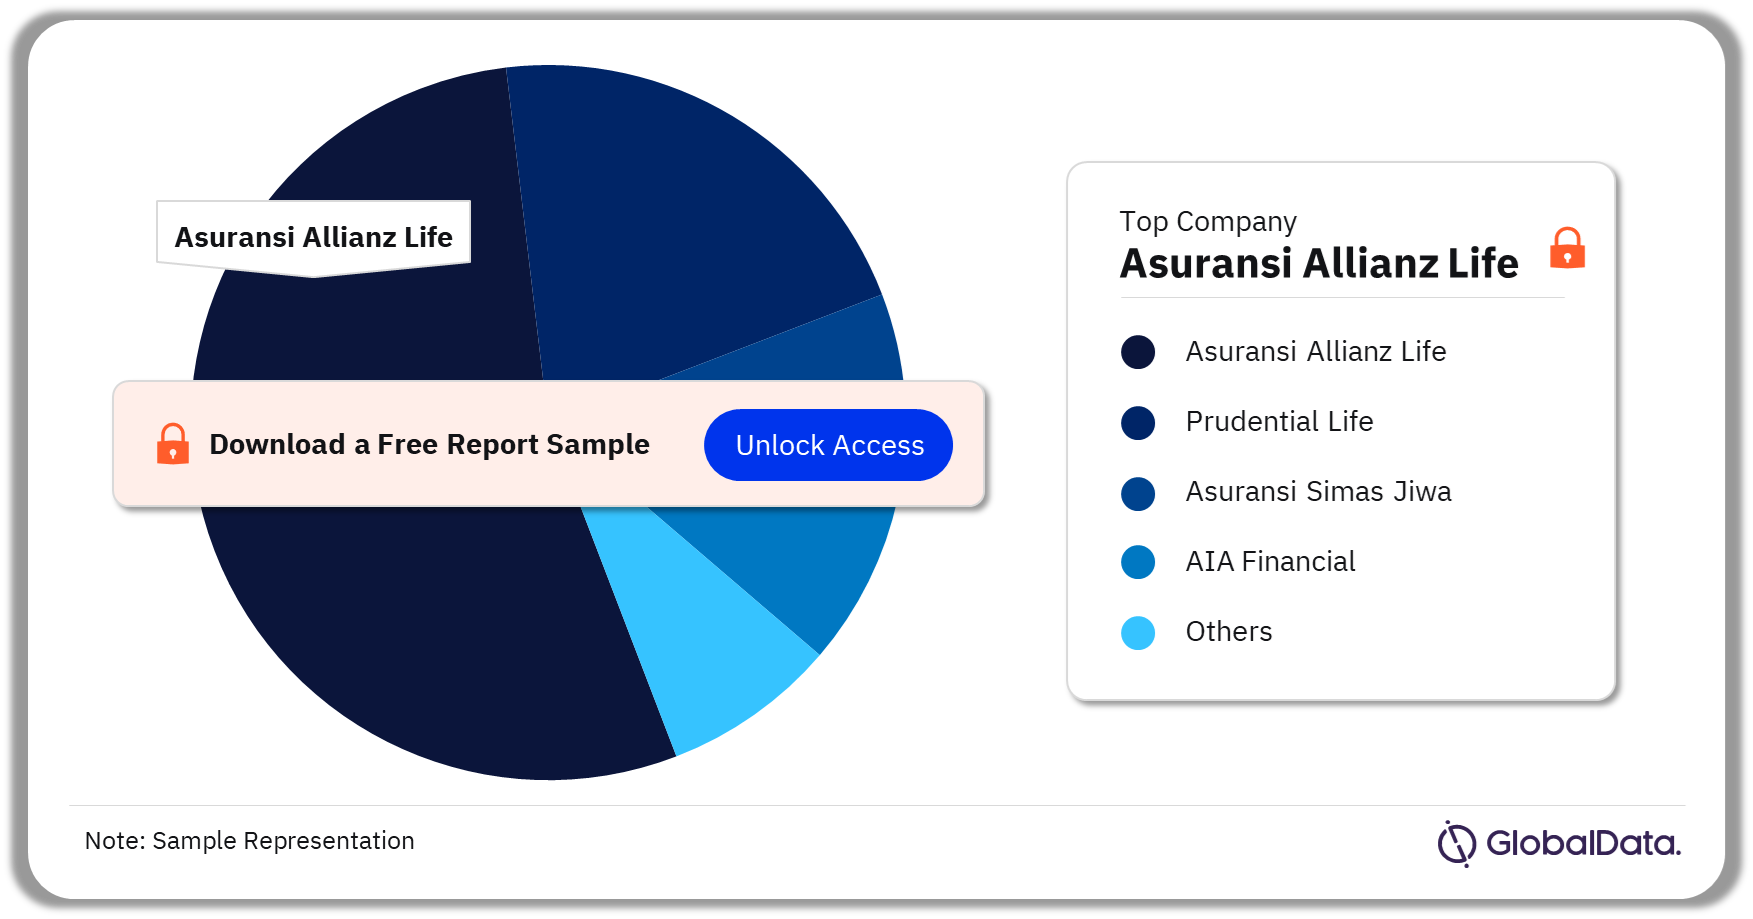 Indonesia Life Insurance Market Analysis by Companies, 2021 (%)